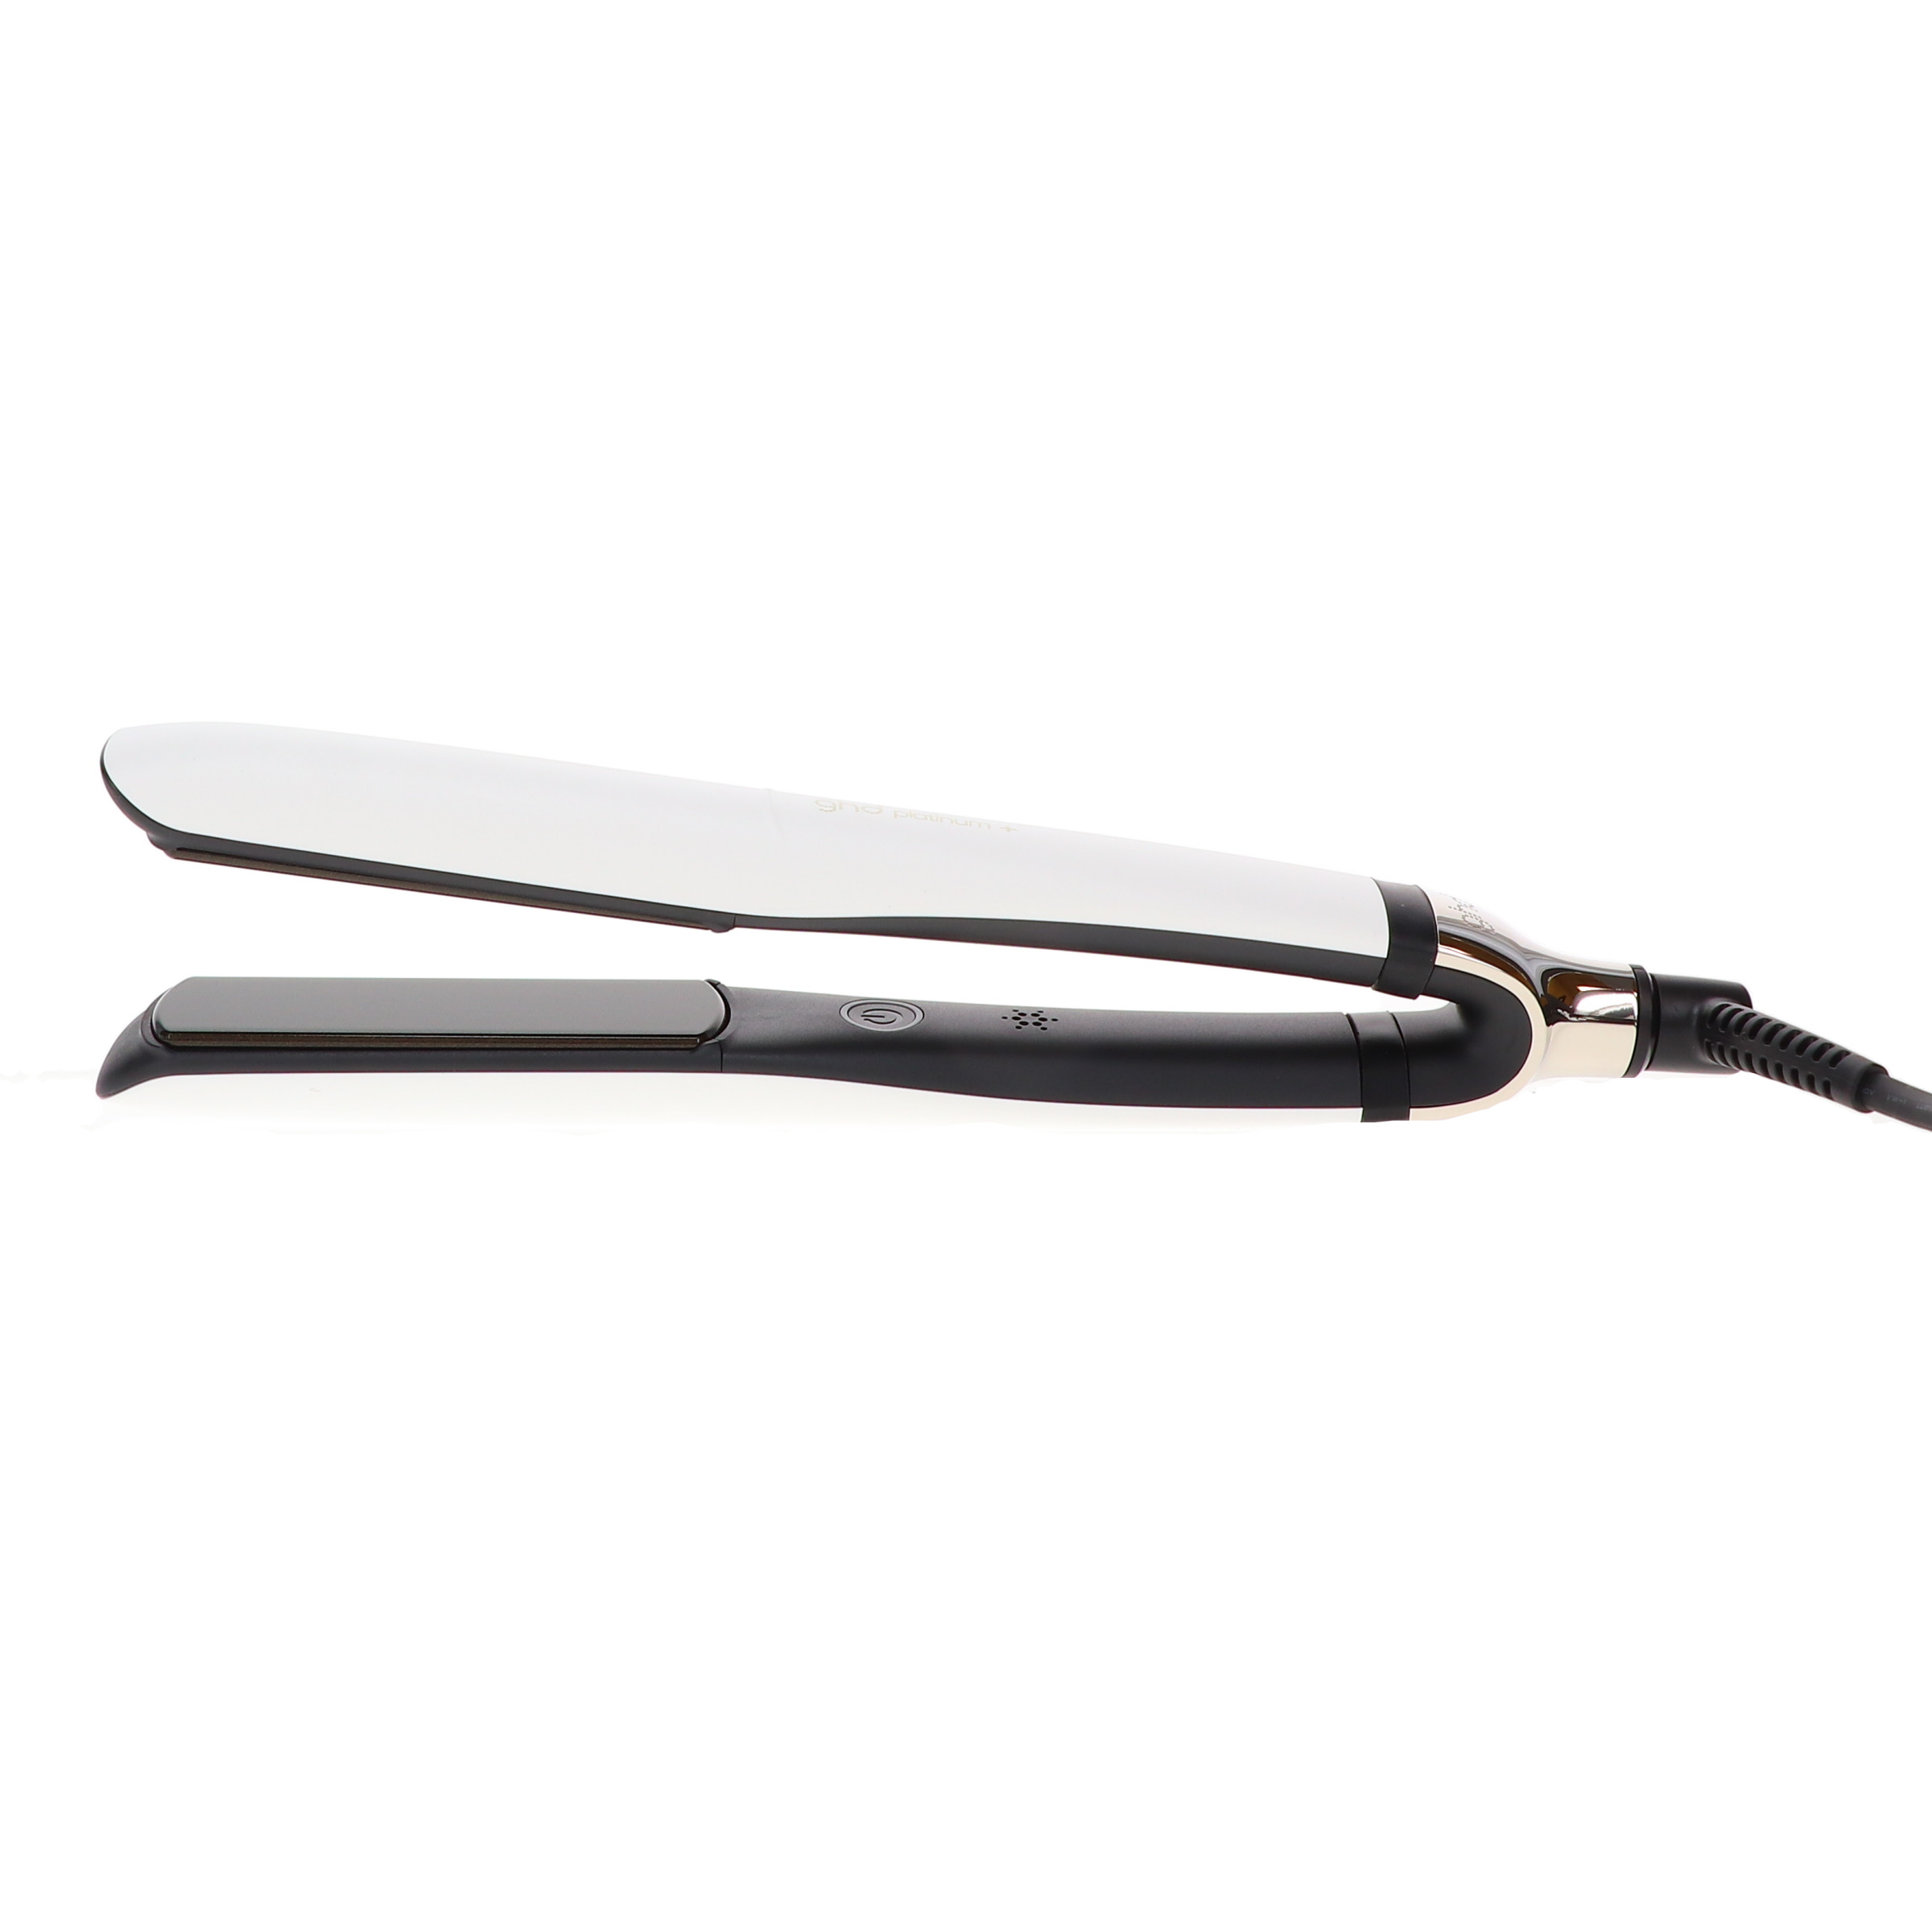 ghd Stylers Platinum + White 1 Styler - image 3 of 6